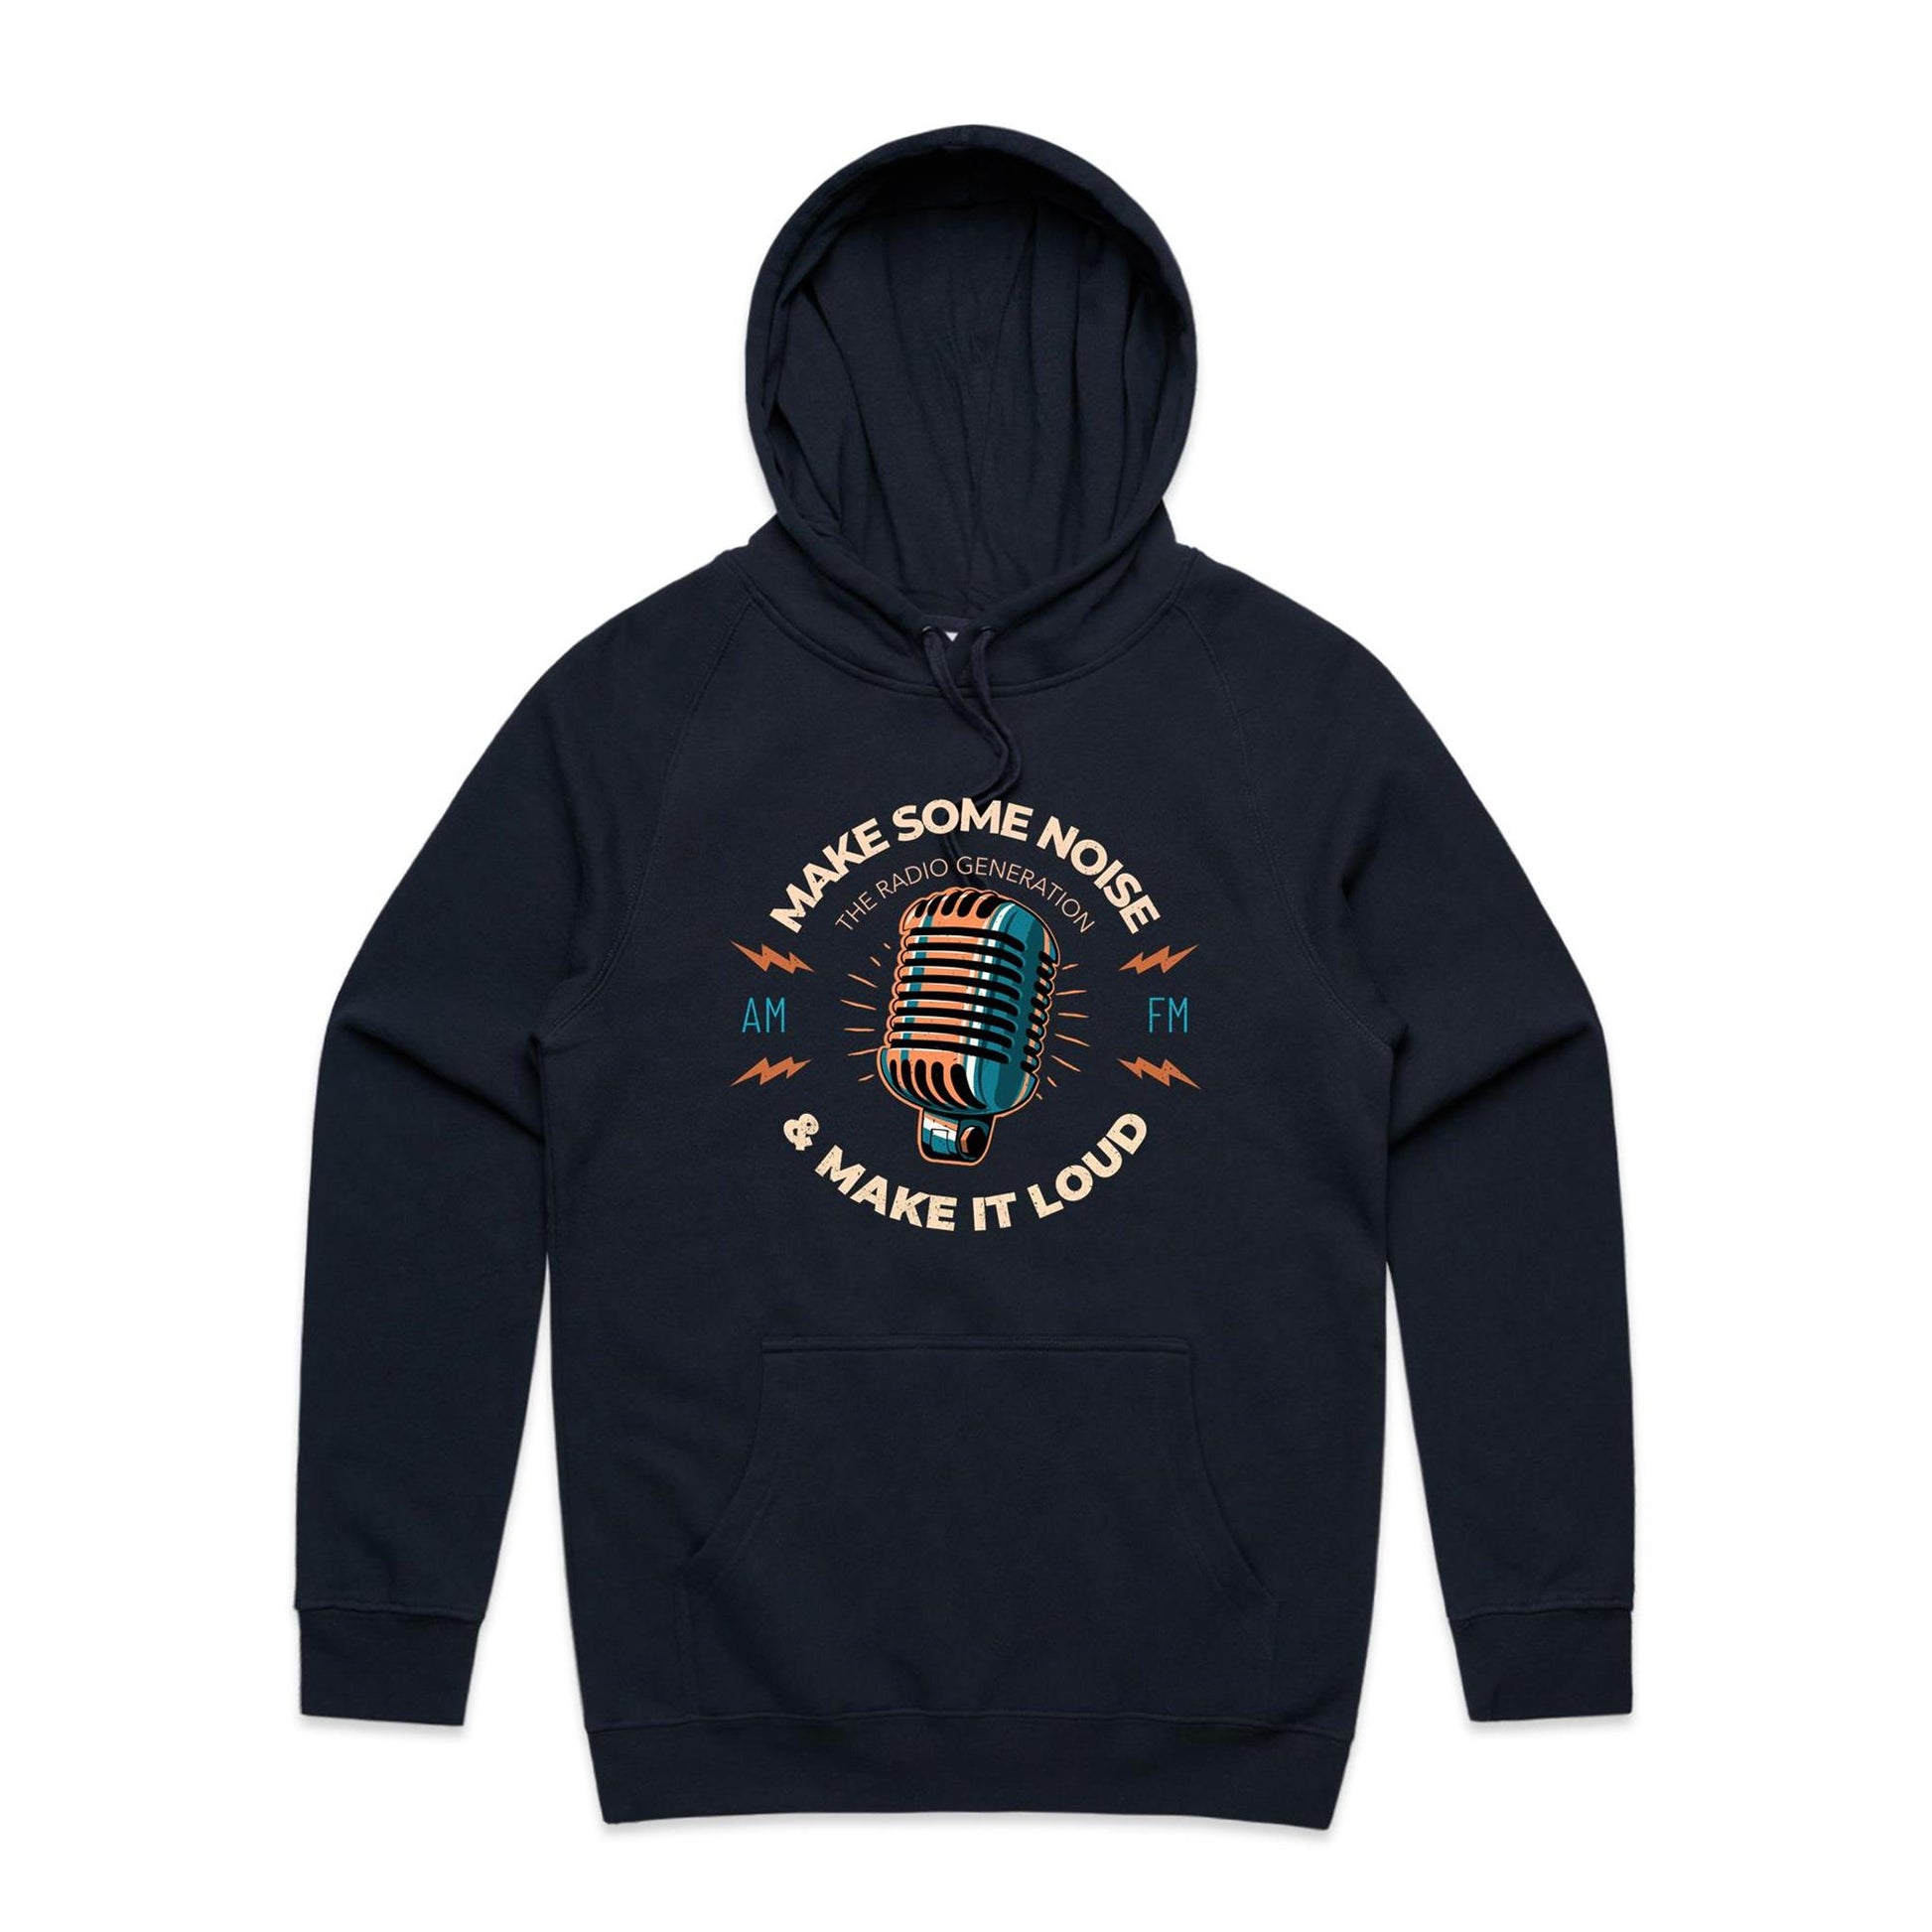 Make Some Noise And Make It Loud - Supply Hood Navy Mens Supply Hoodie Music